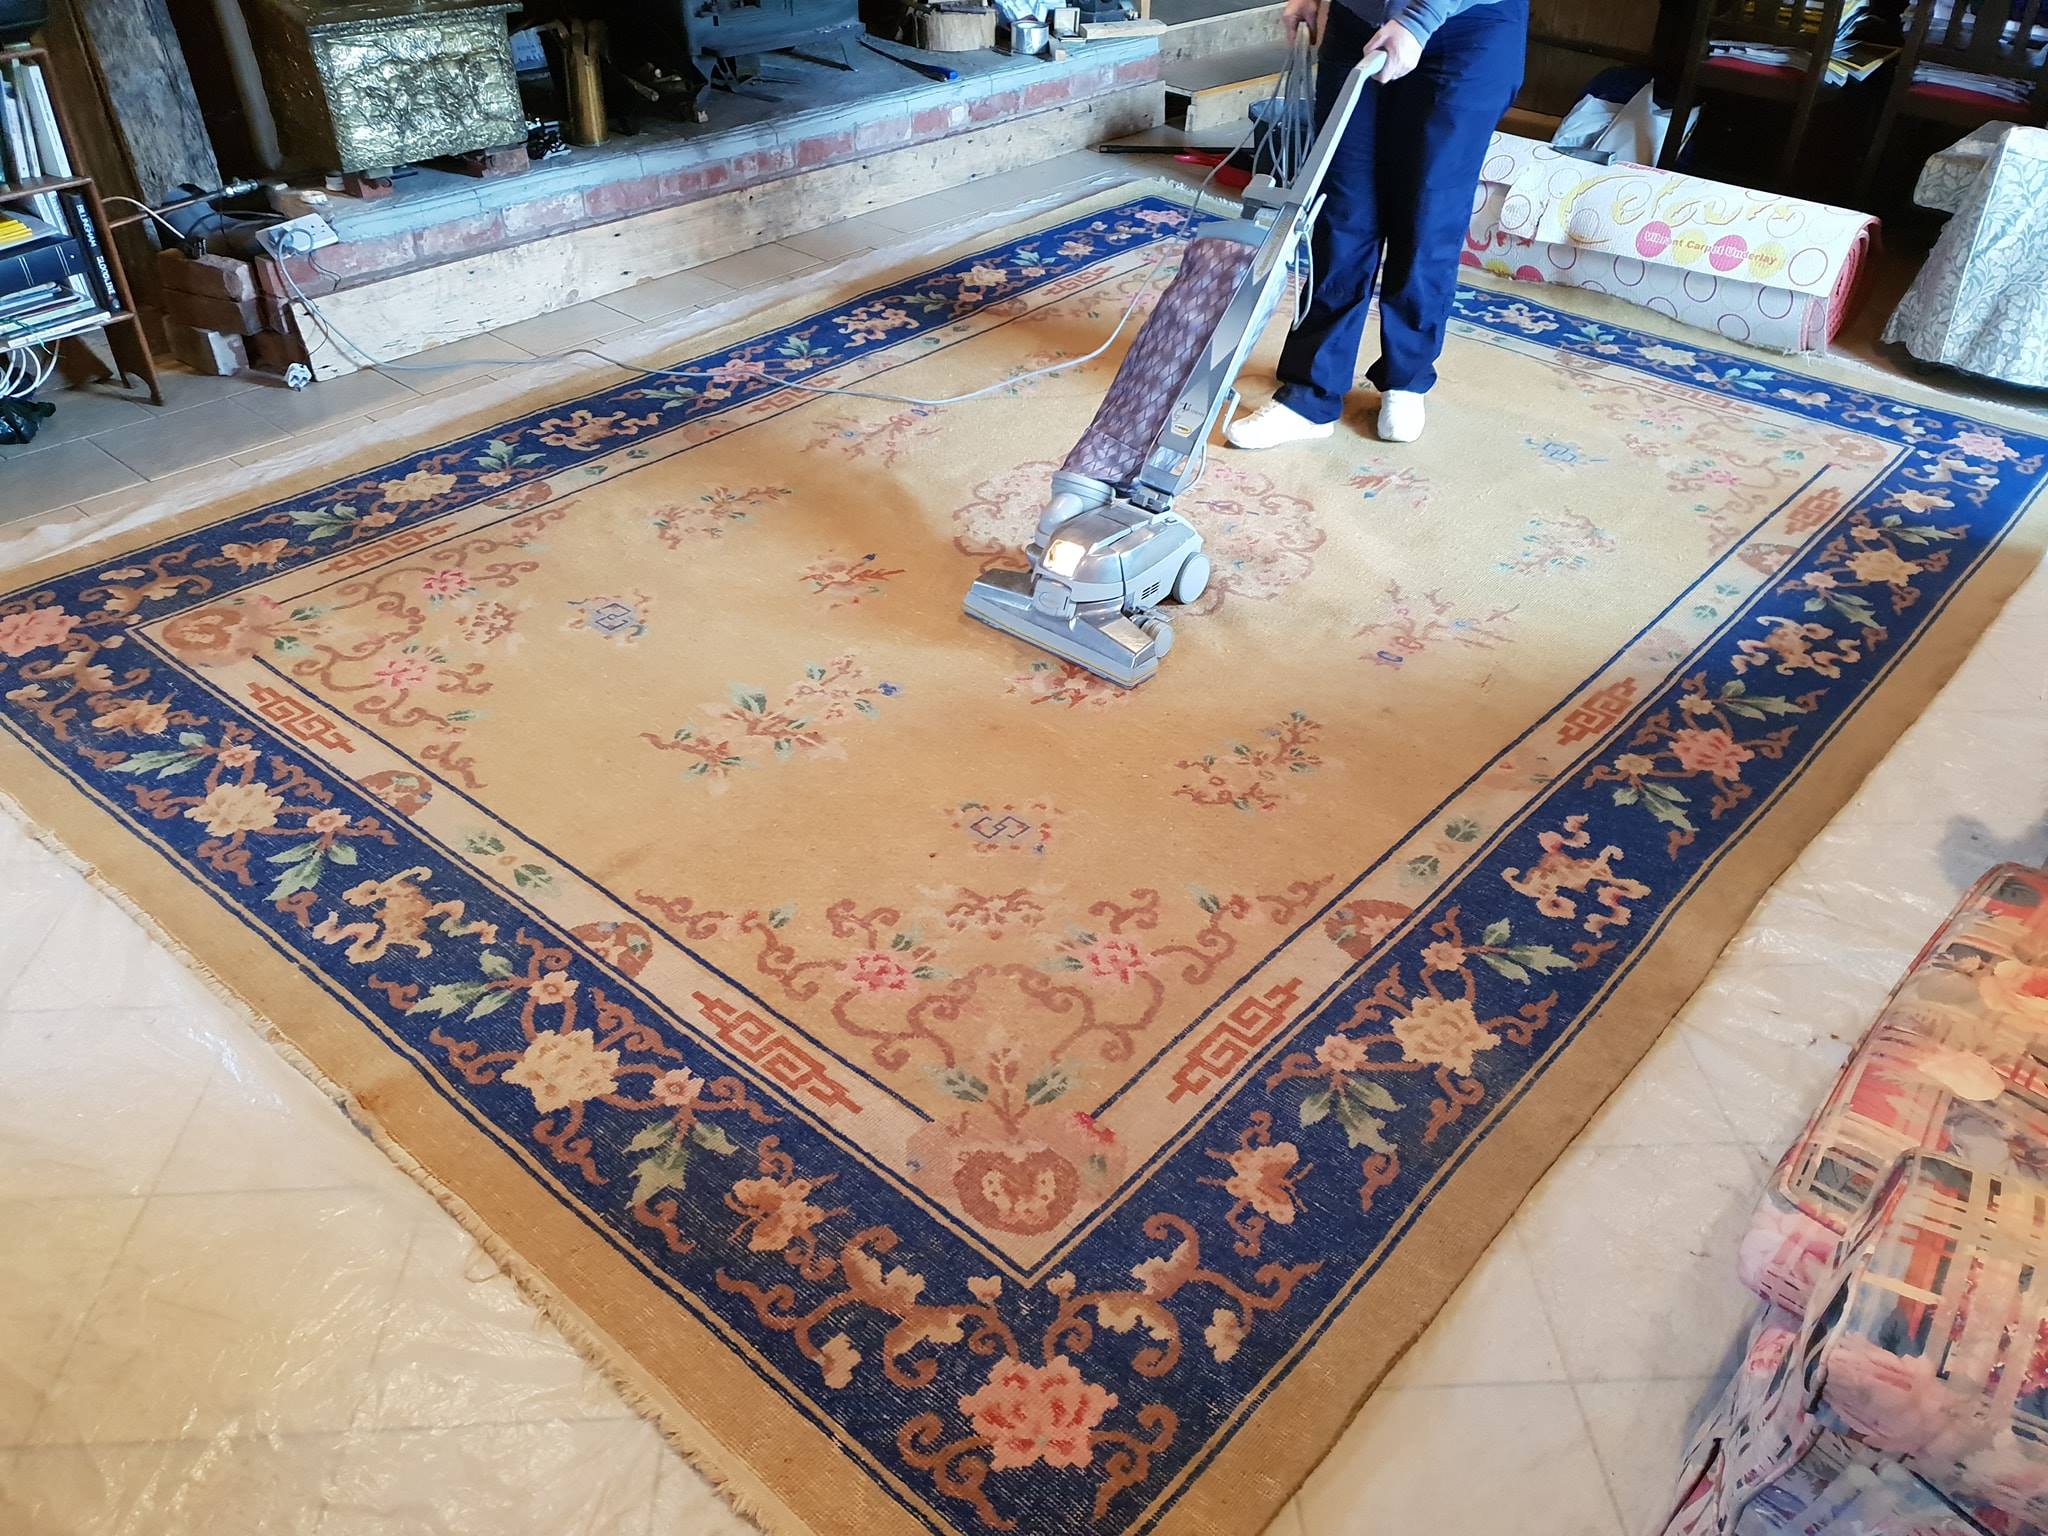 Rug cleaning in action